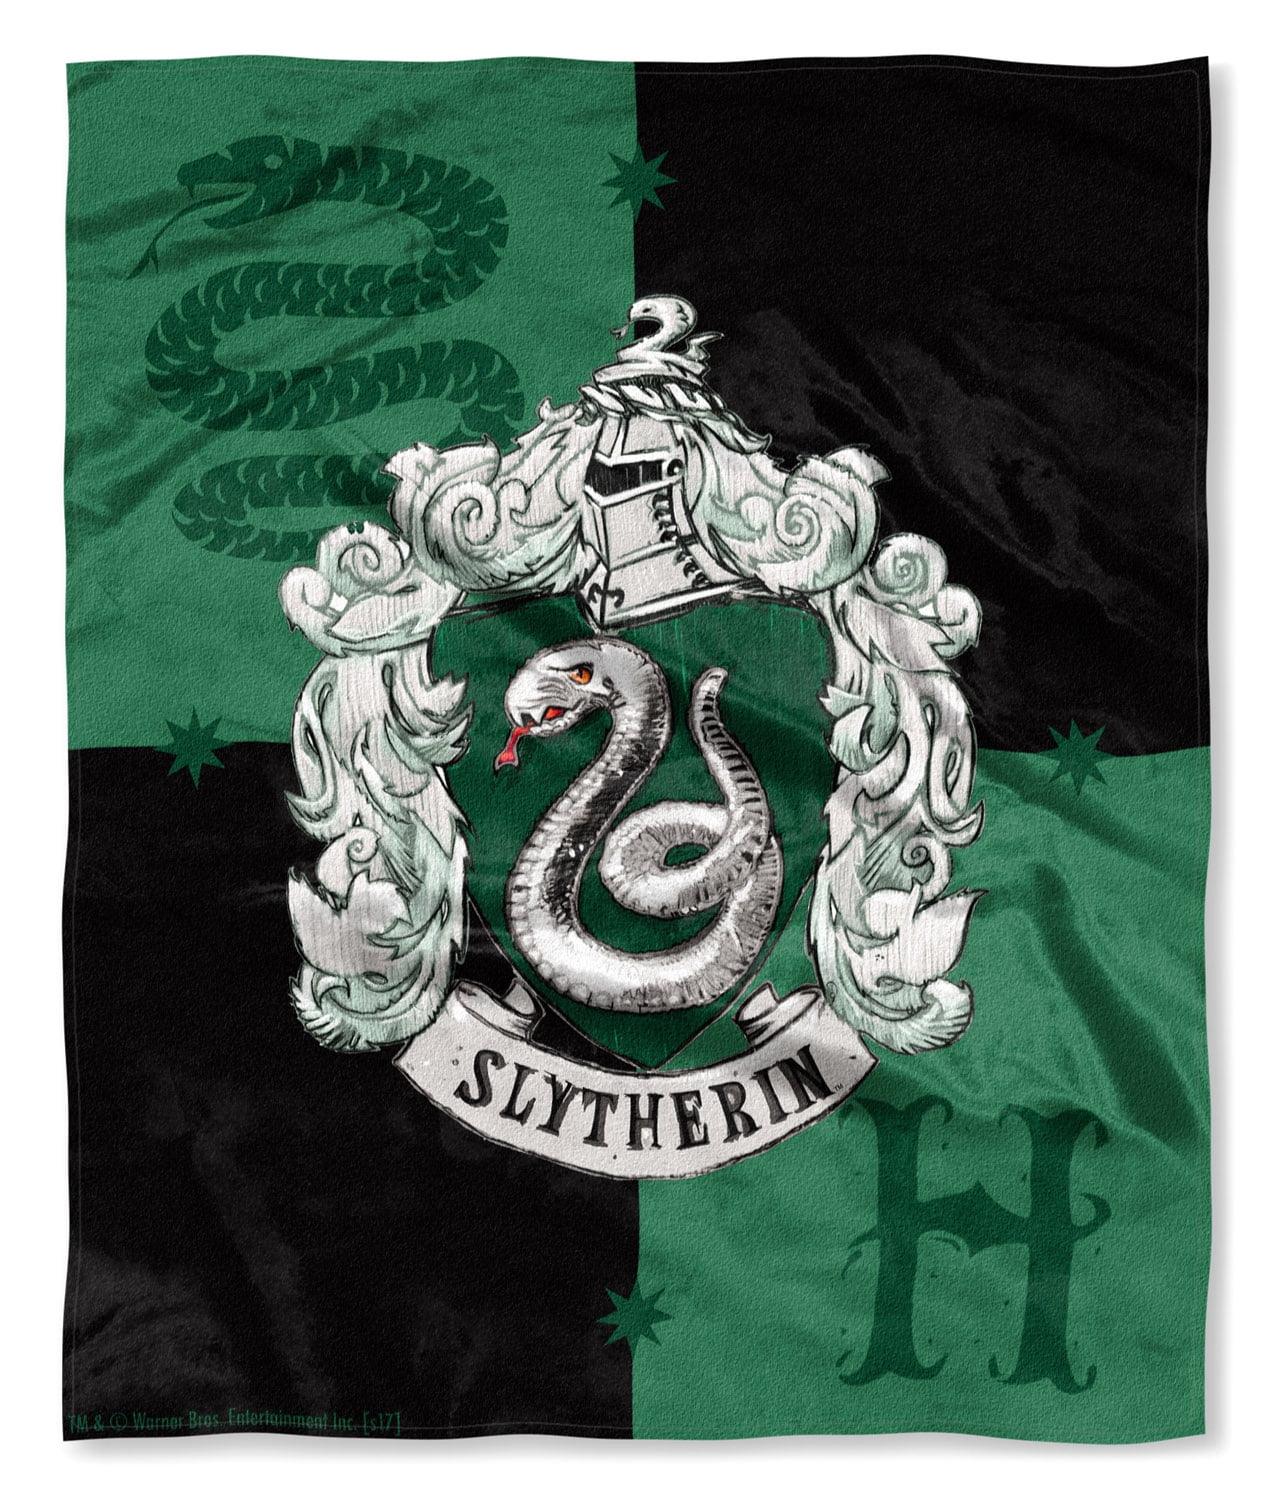 Slytherin House in Harry Potter Houses 